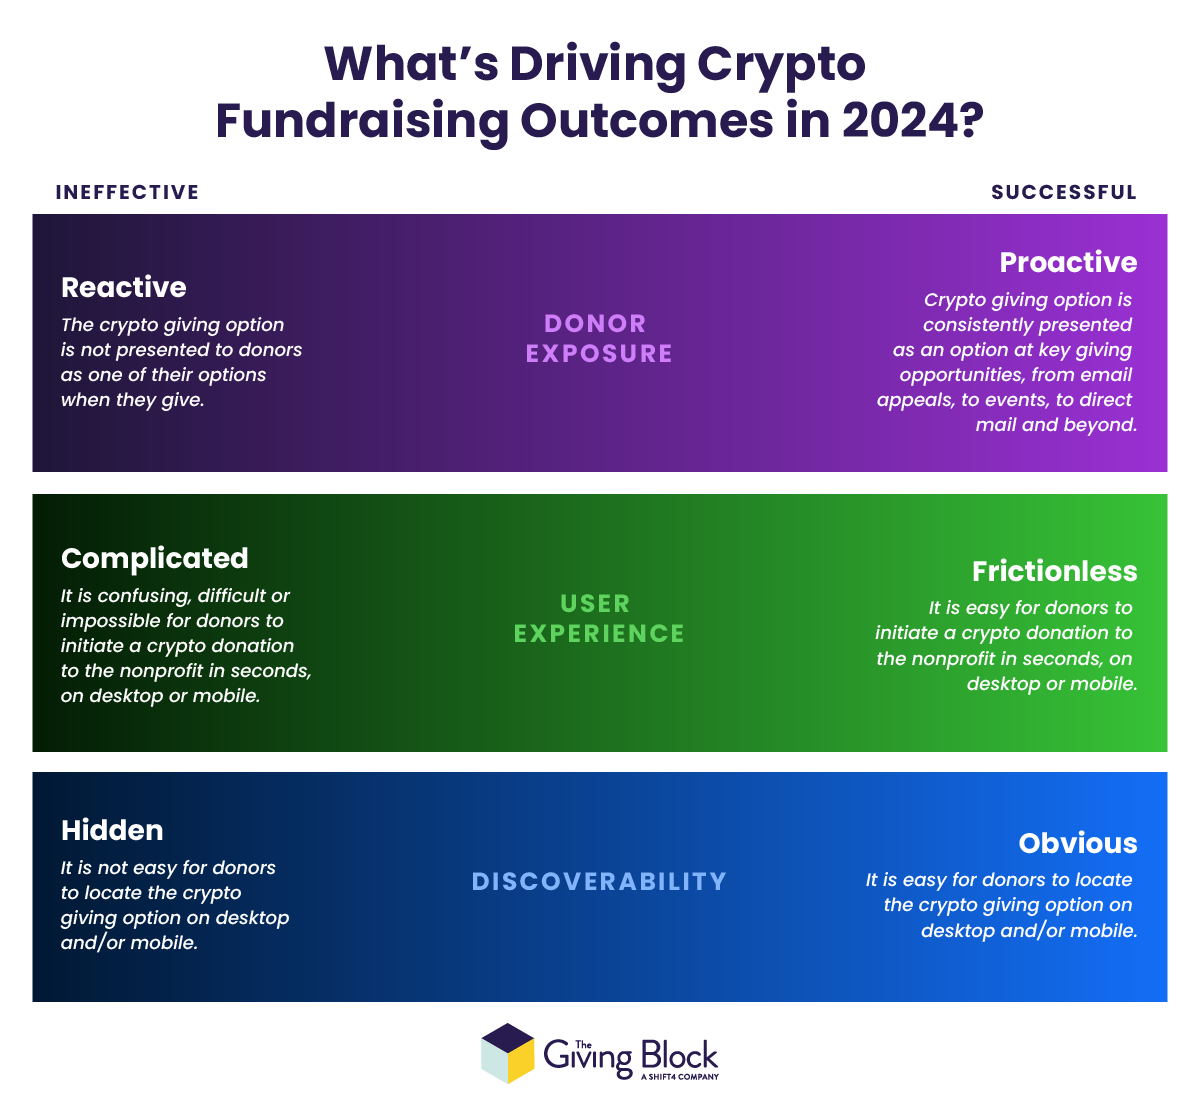 What’s Driving Crypto Fundraising Outcomes in 2024